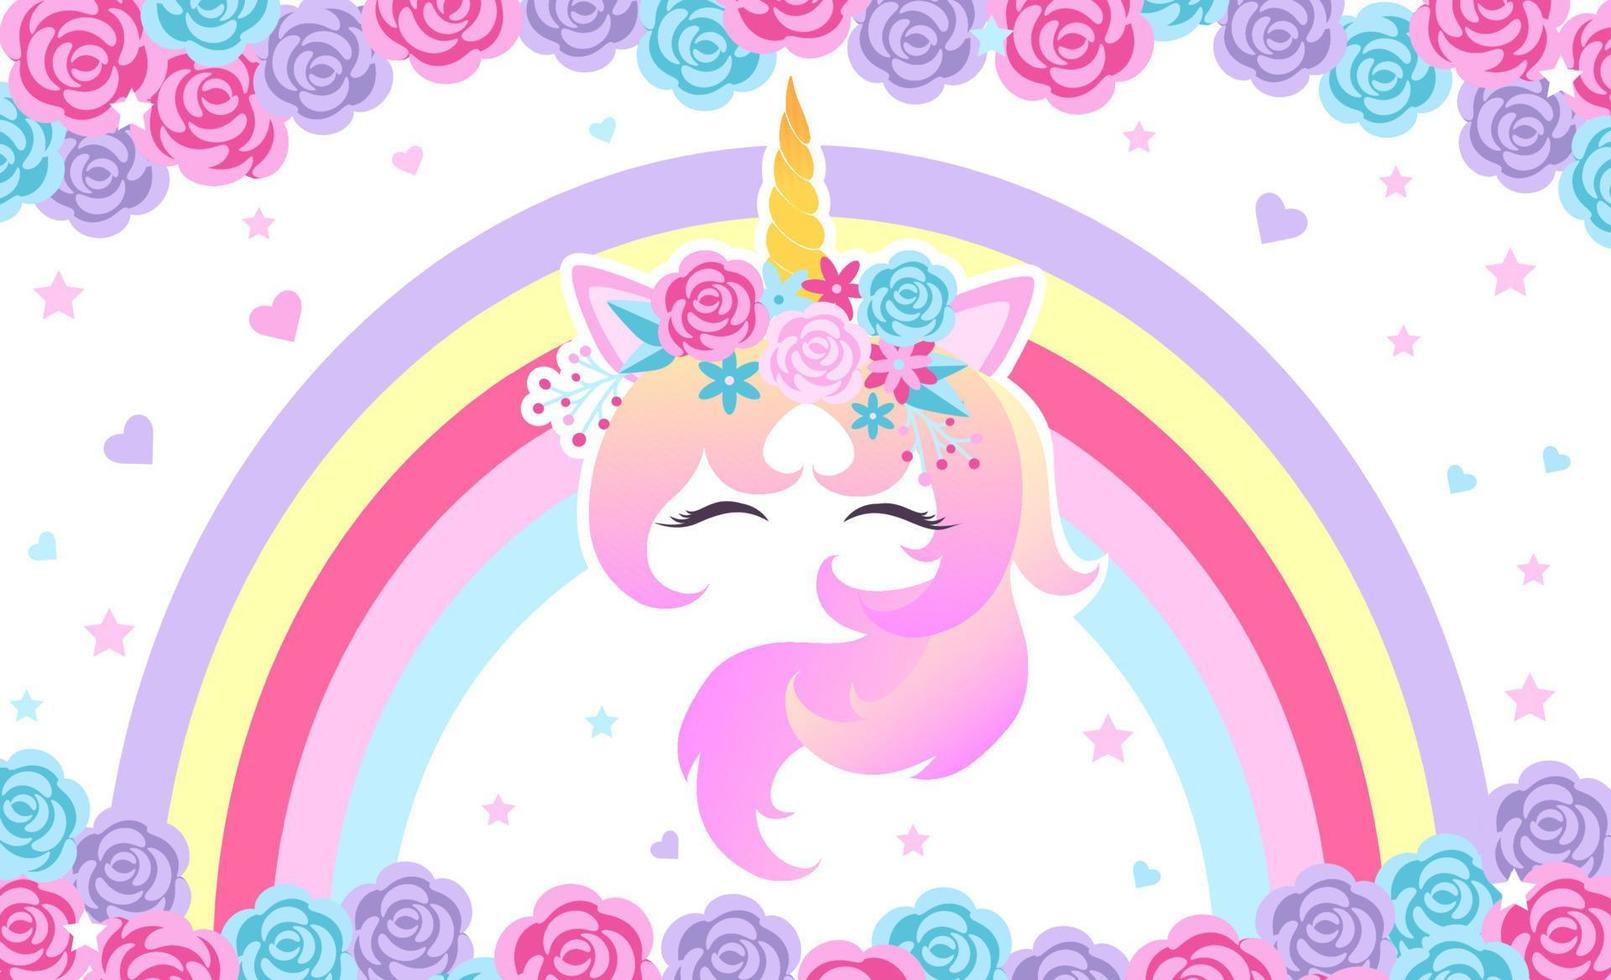 Fantasy blue and pink background with the head of a magical unicorn with closed eyes, rainbow, hearts and stars. Template for design and decoration. vector